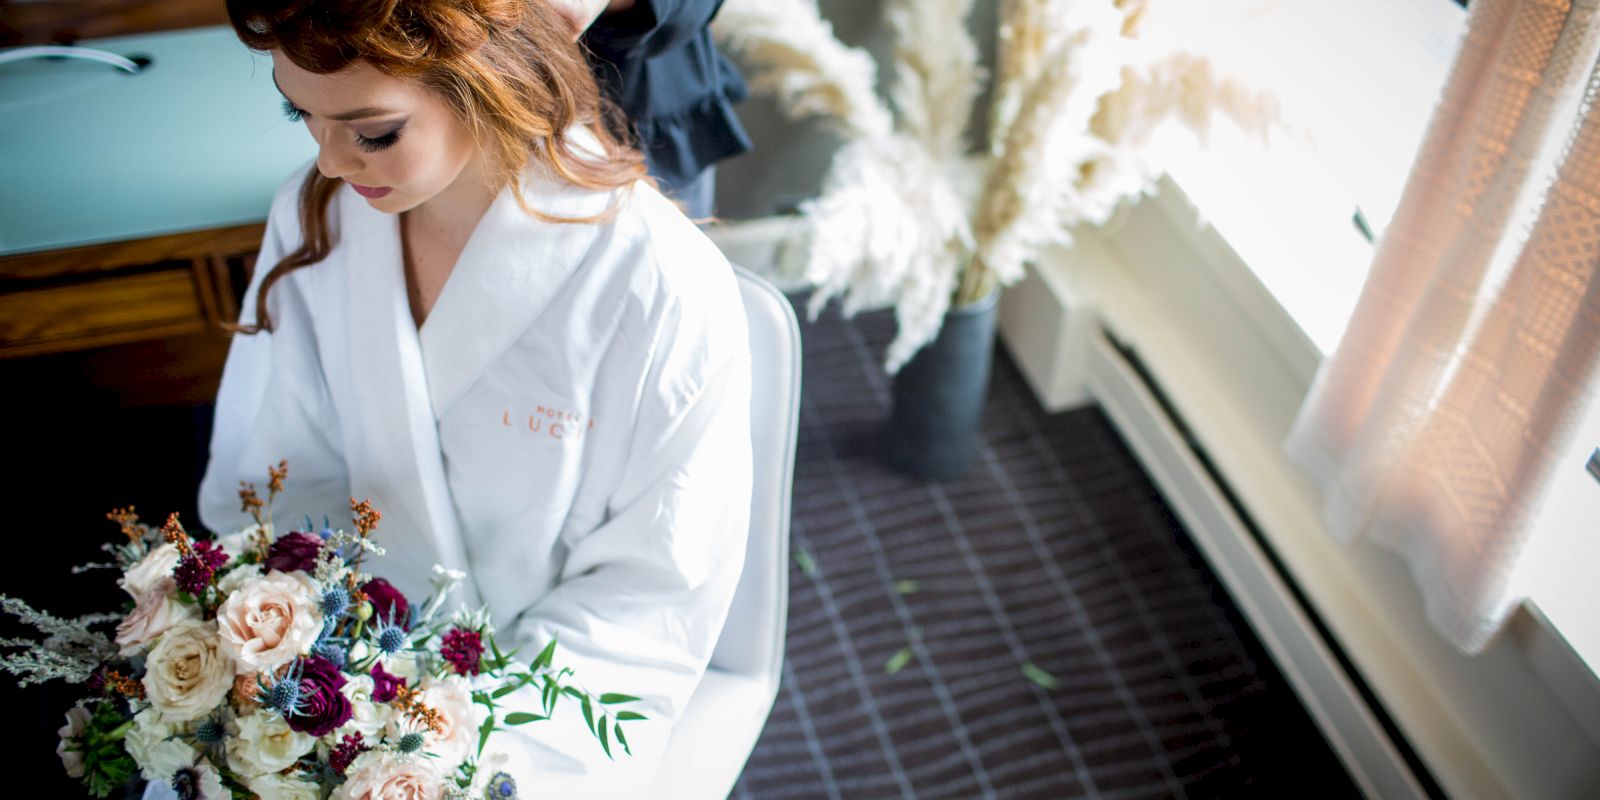 A woman in a white robe holds a bouquet while her hair is styled, with flowers and a window in the background.